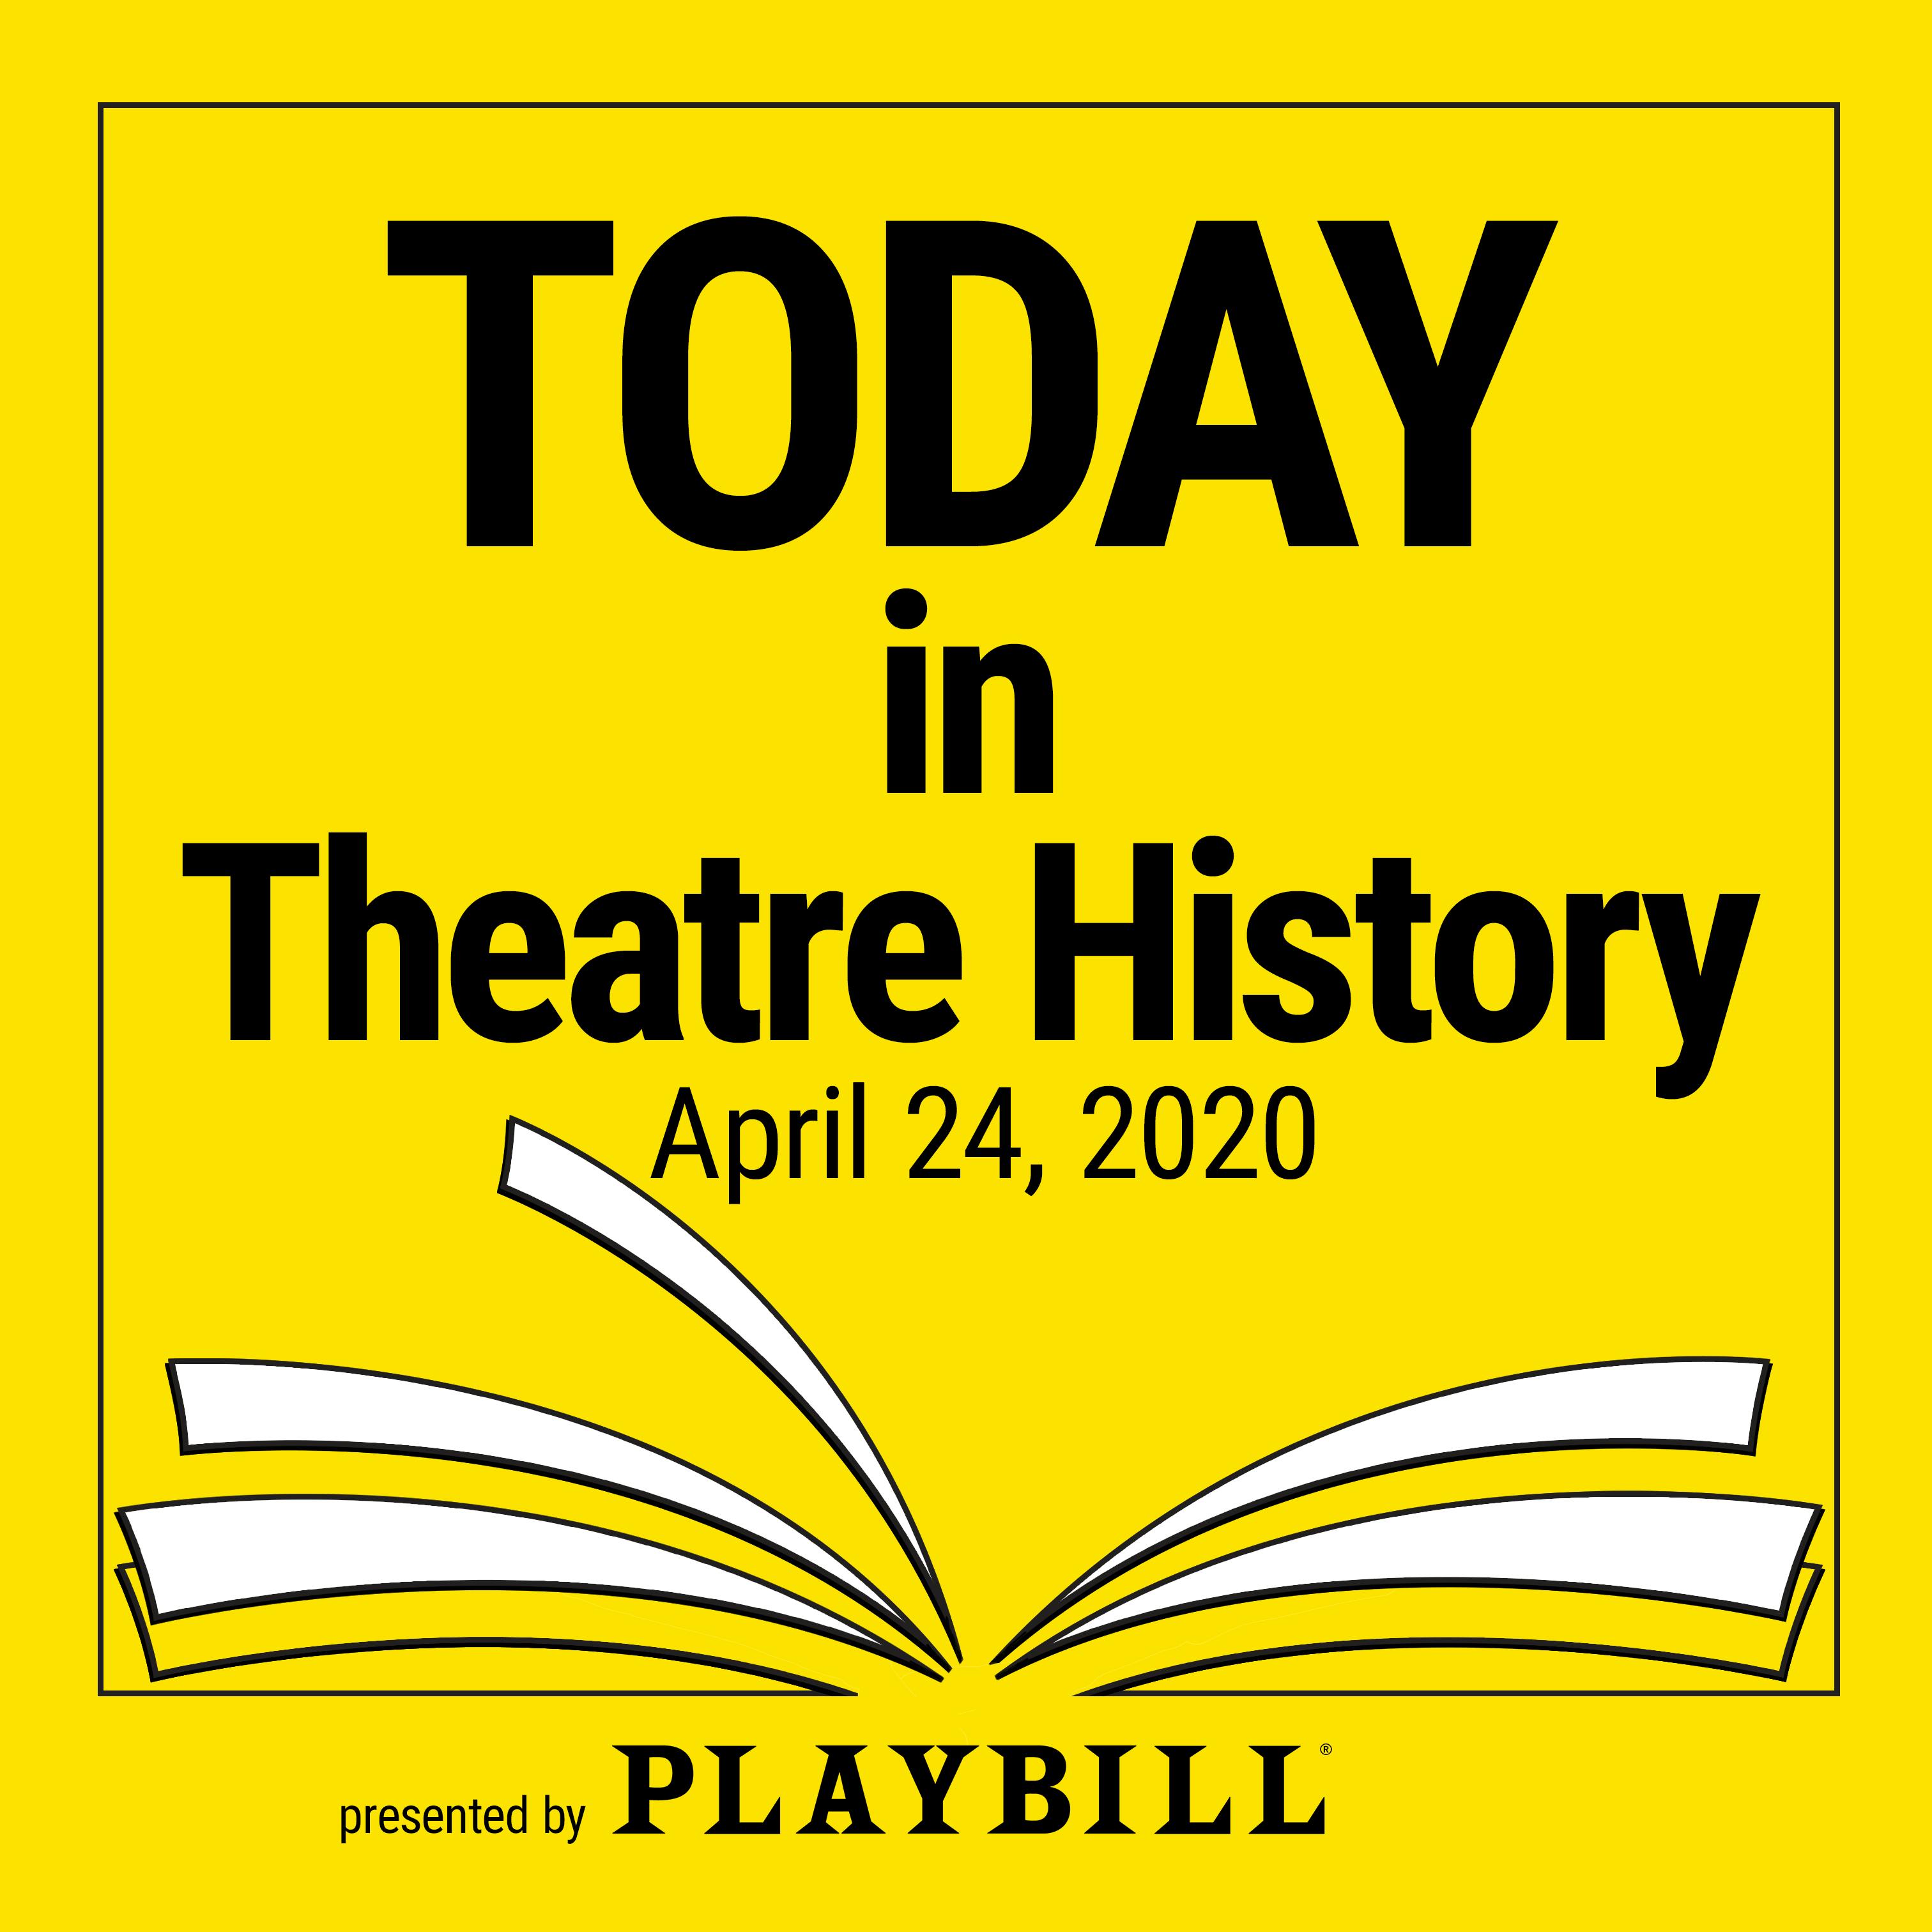 April 24, 2020: Broadway had a “Screw Loose” when Cry-Baby opened, plus Bette Midler brought an appetite for dish in I’ll Eat You Last and more.